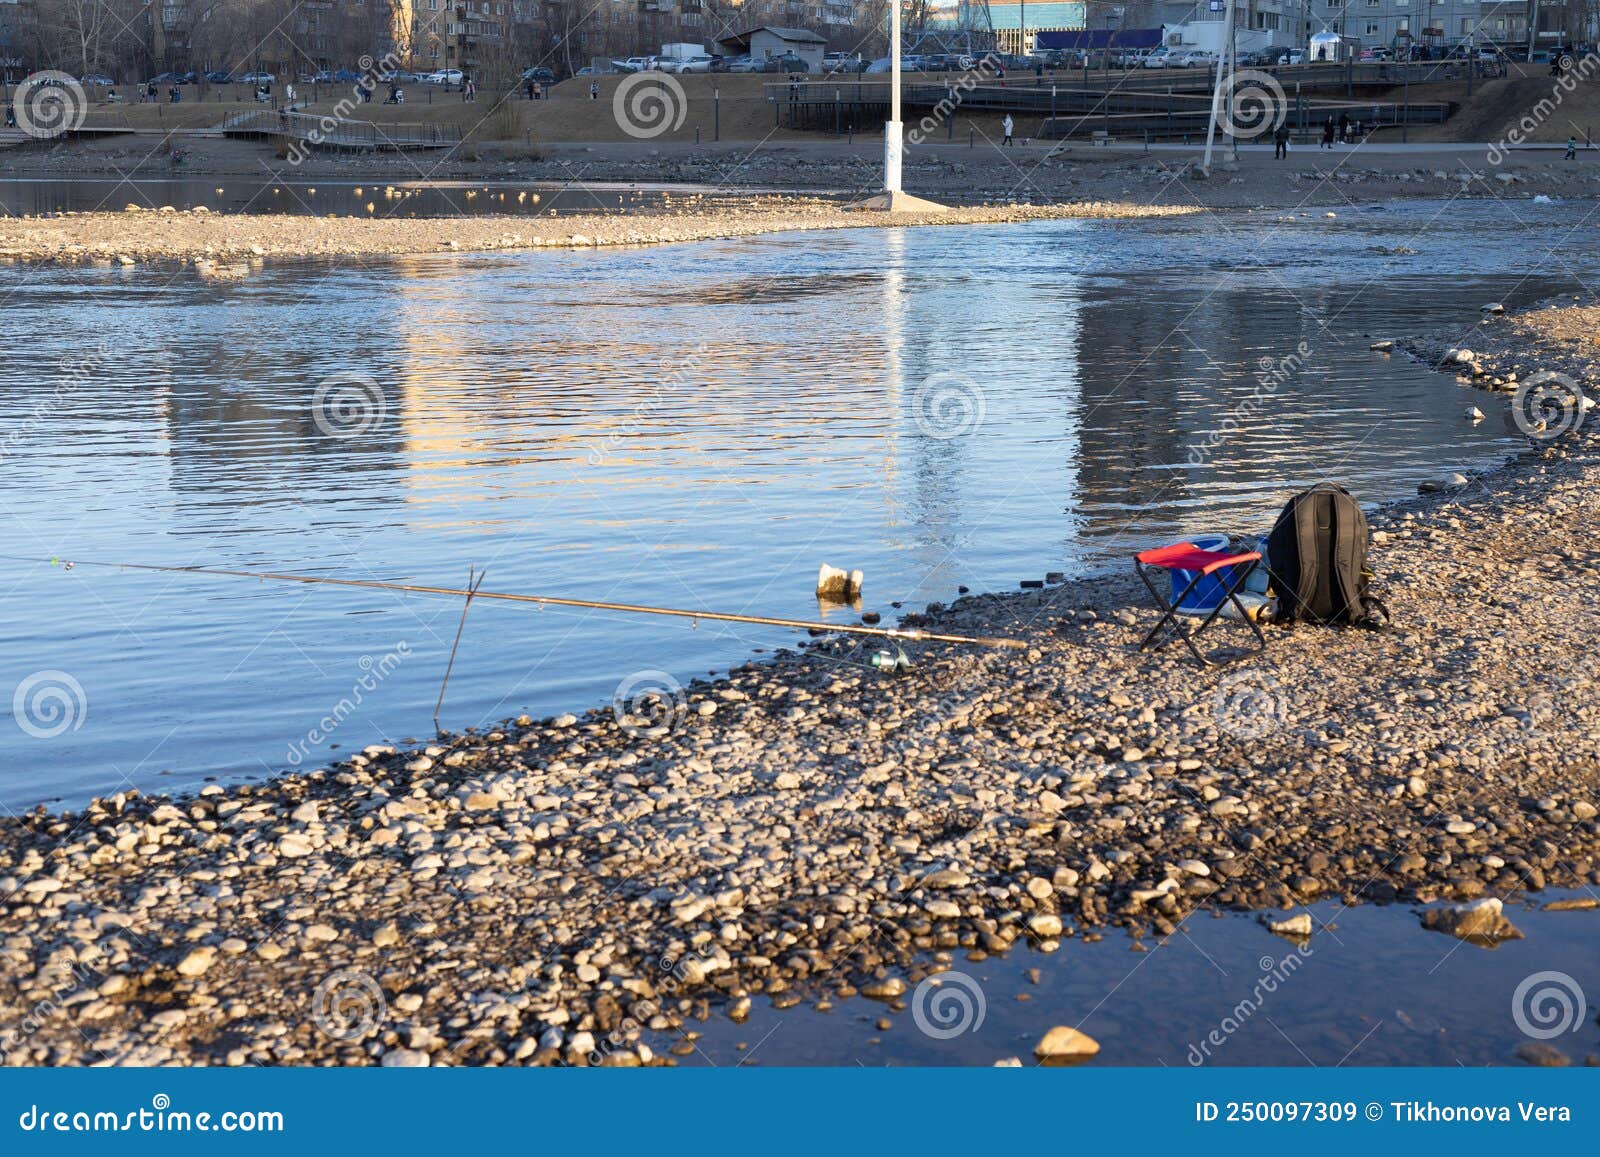 https://thumbs.dreamstime.com/z/backpack-fishing-tackle-river-bank-rod-chair-yenisey-city-250097309.jpg